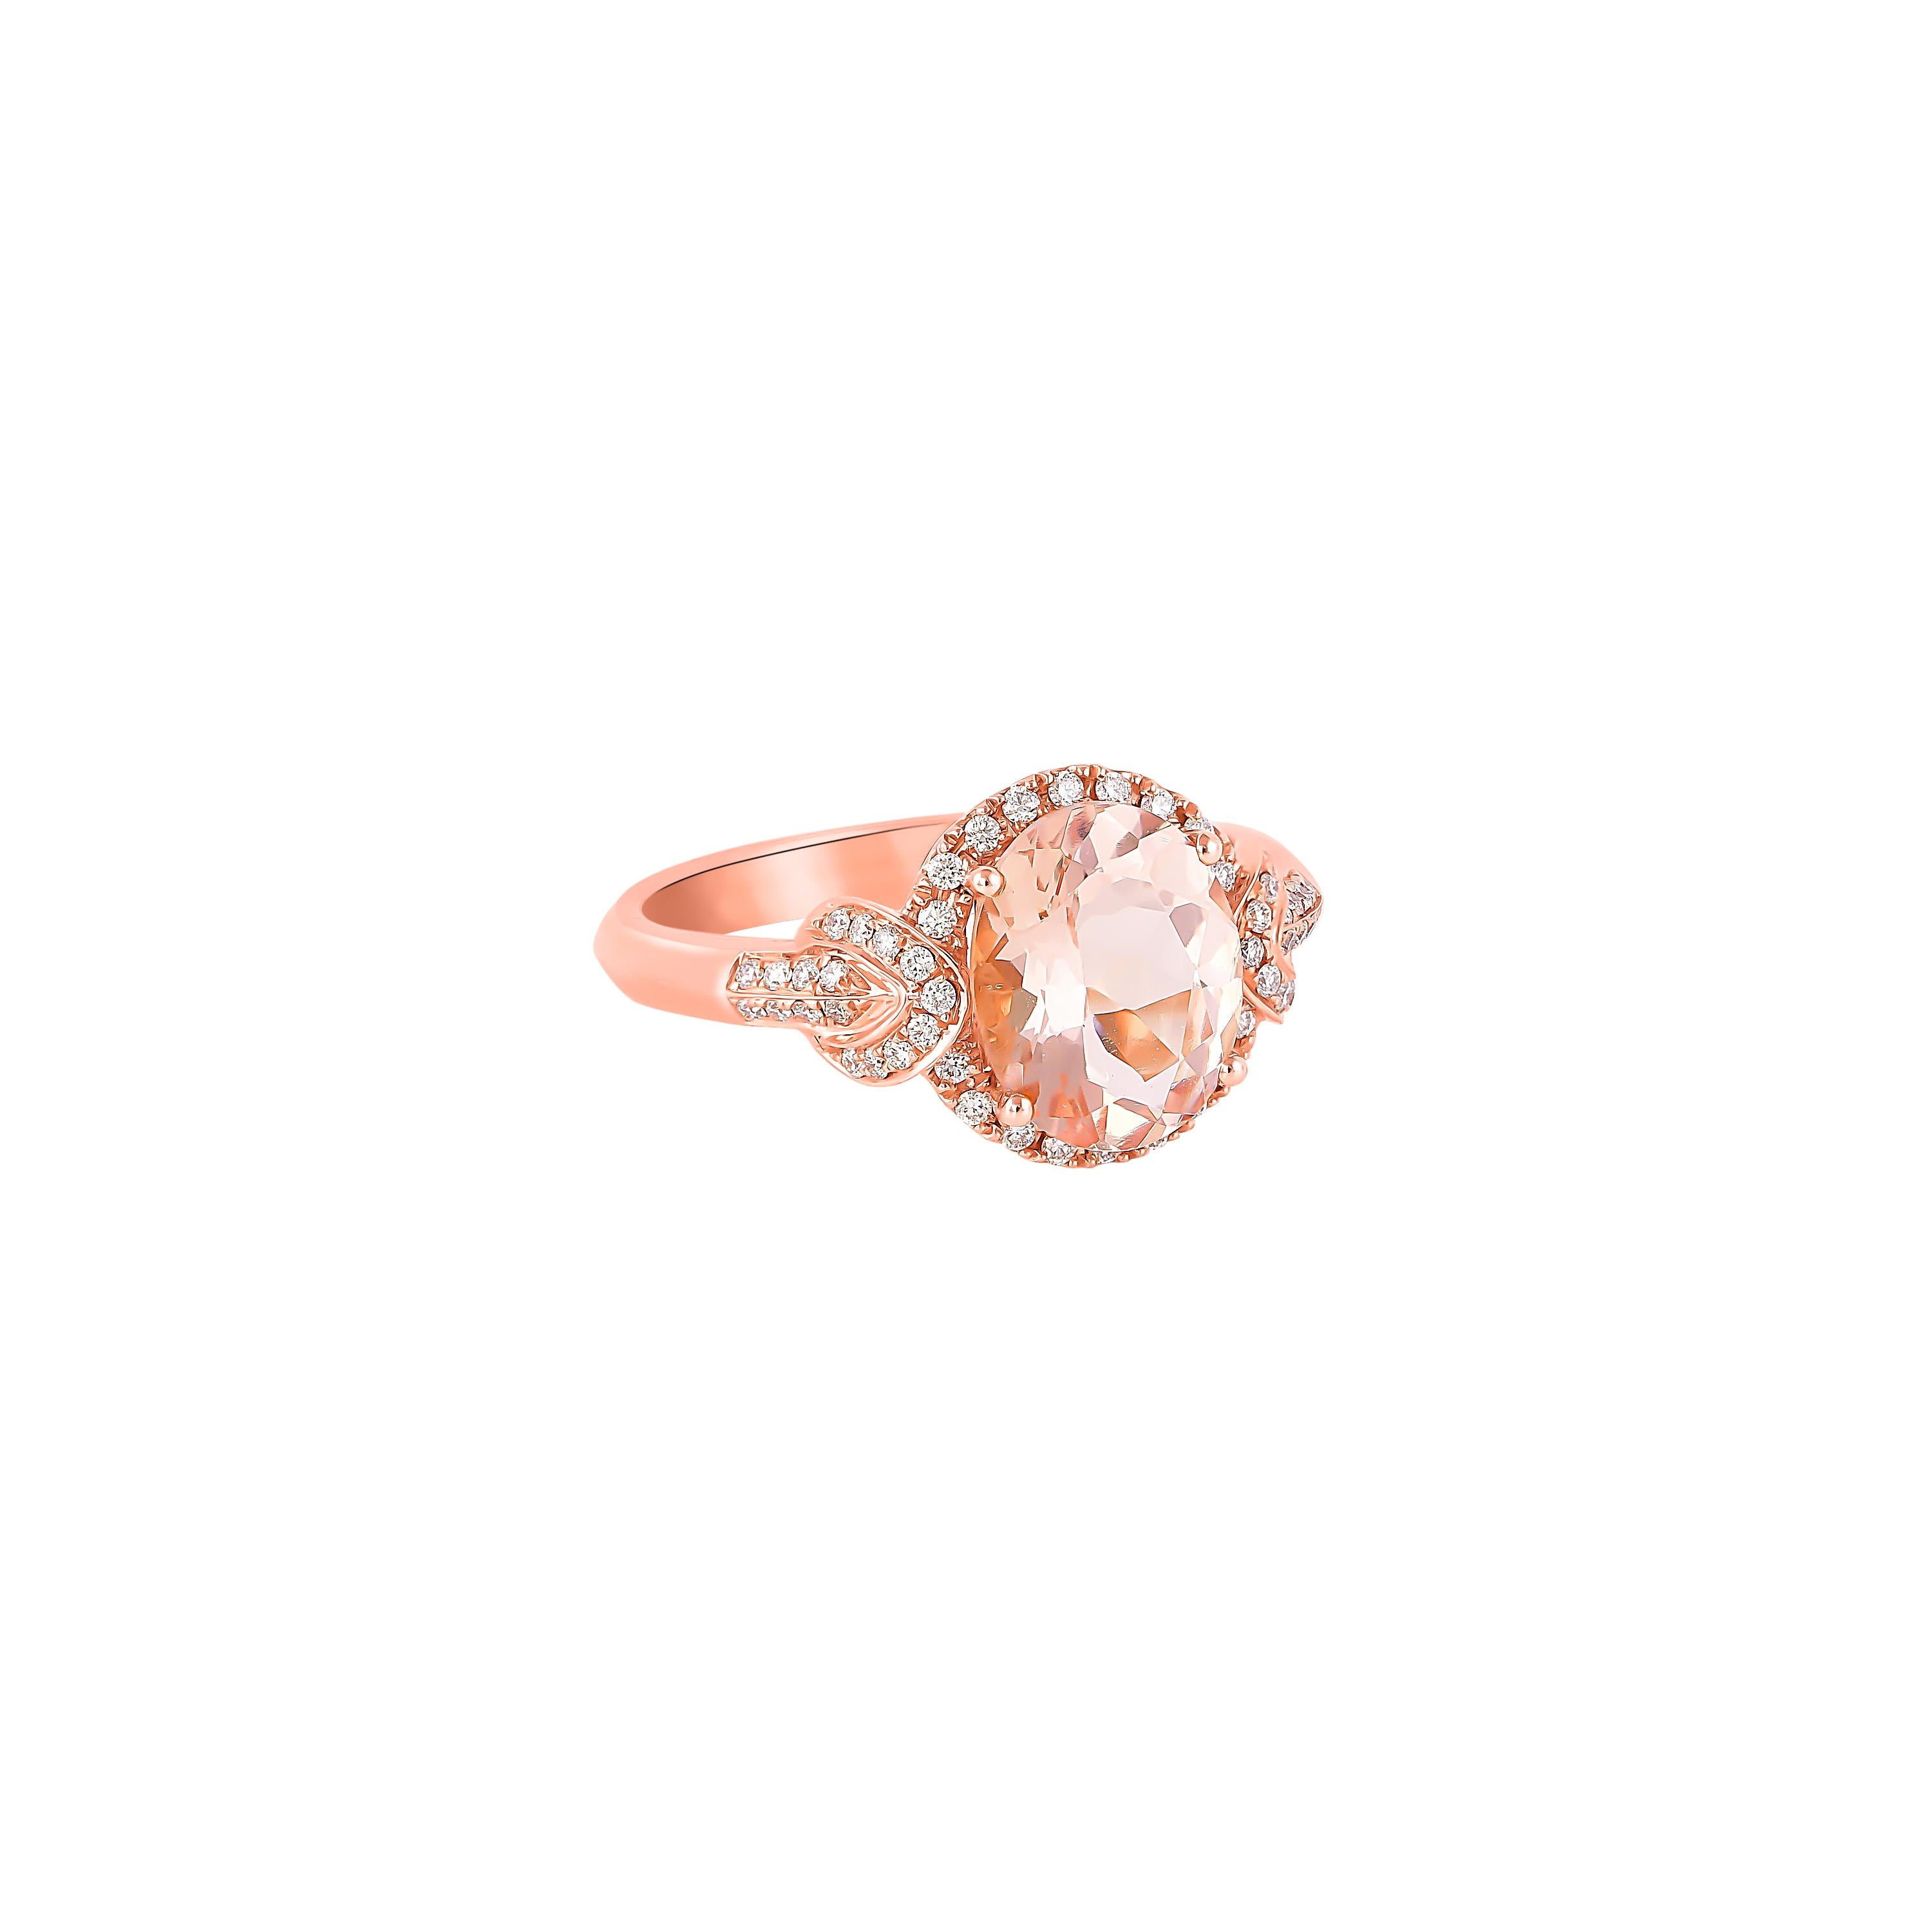 This collection features an array of magnificent morganites! Accented with diamonds these rings are made in rose gold and present a classic yet elegant look. 

Classic morganite ring in 18K rose gold with diamonds. 

Morganite: 2.21 carat oval